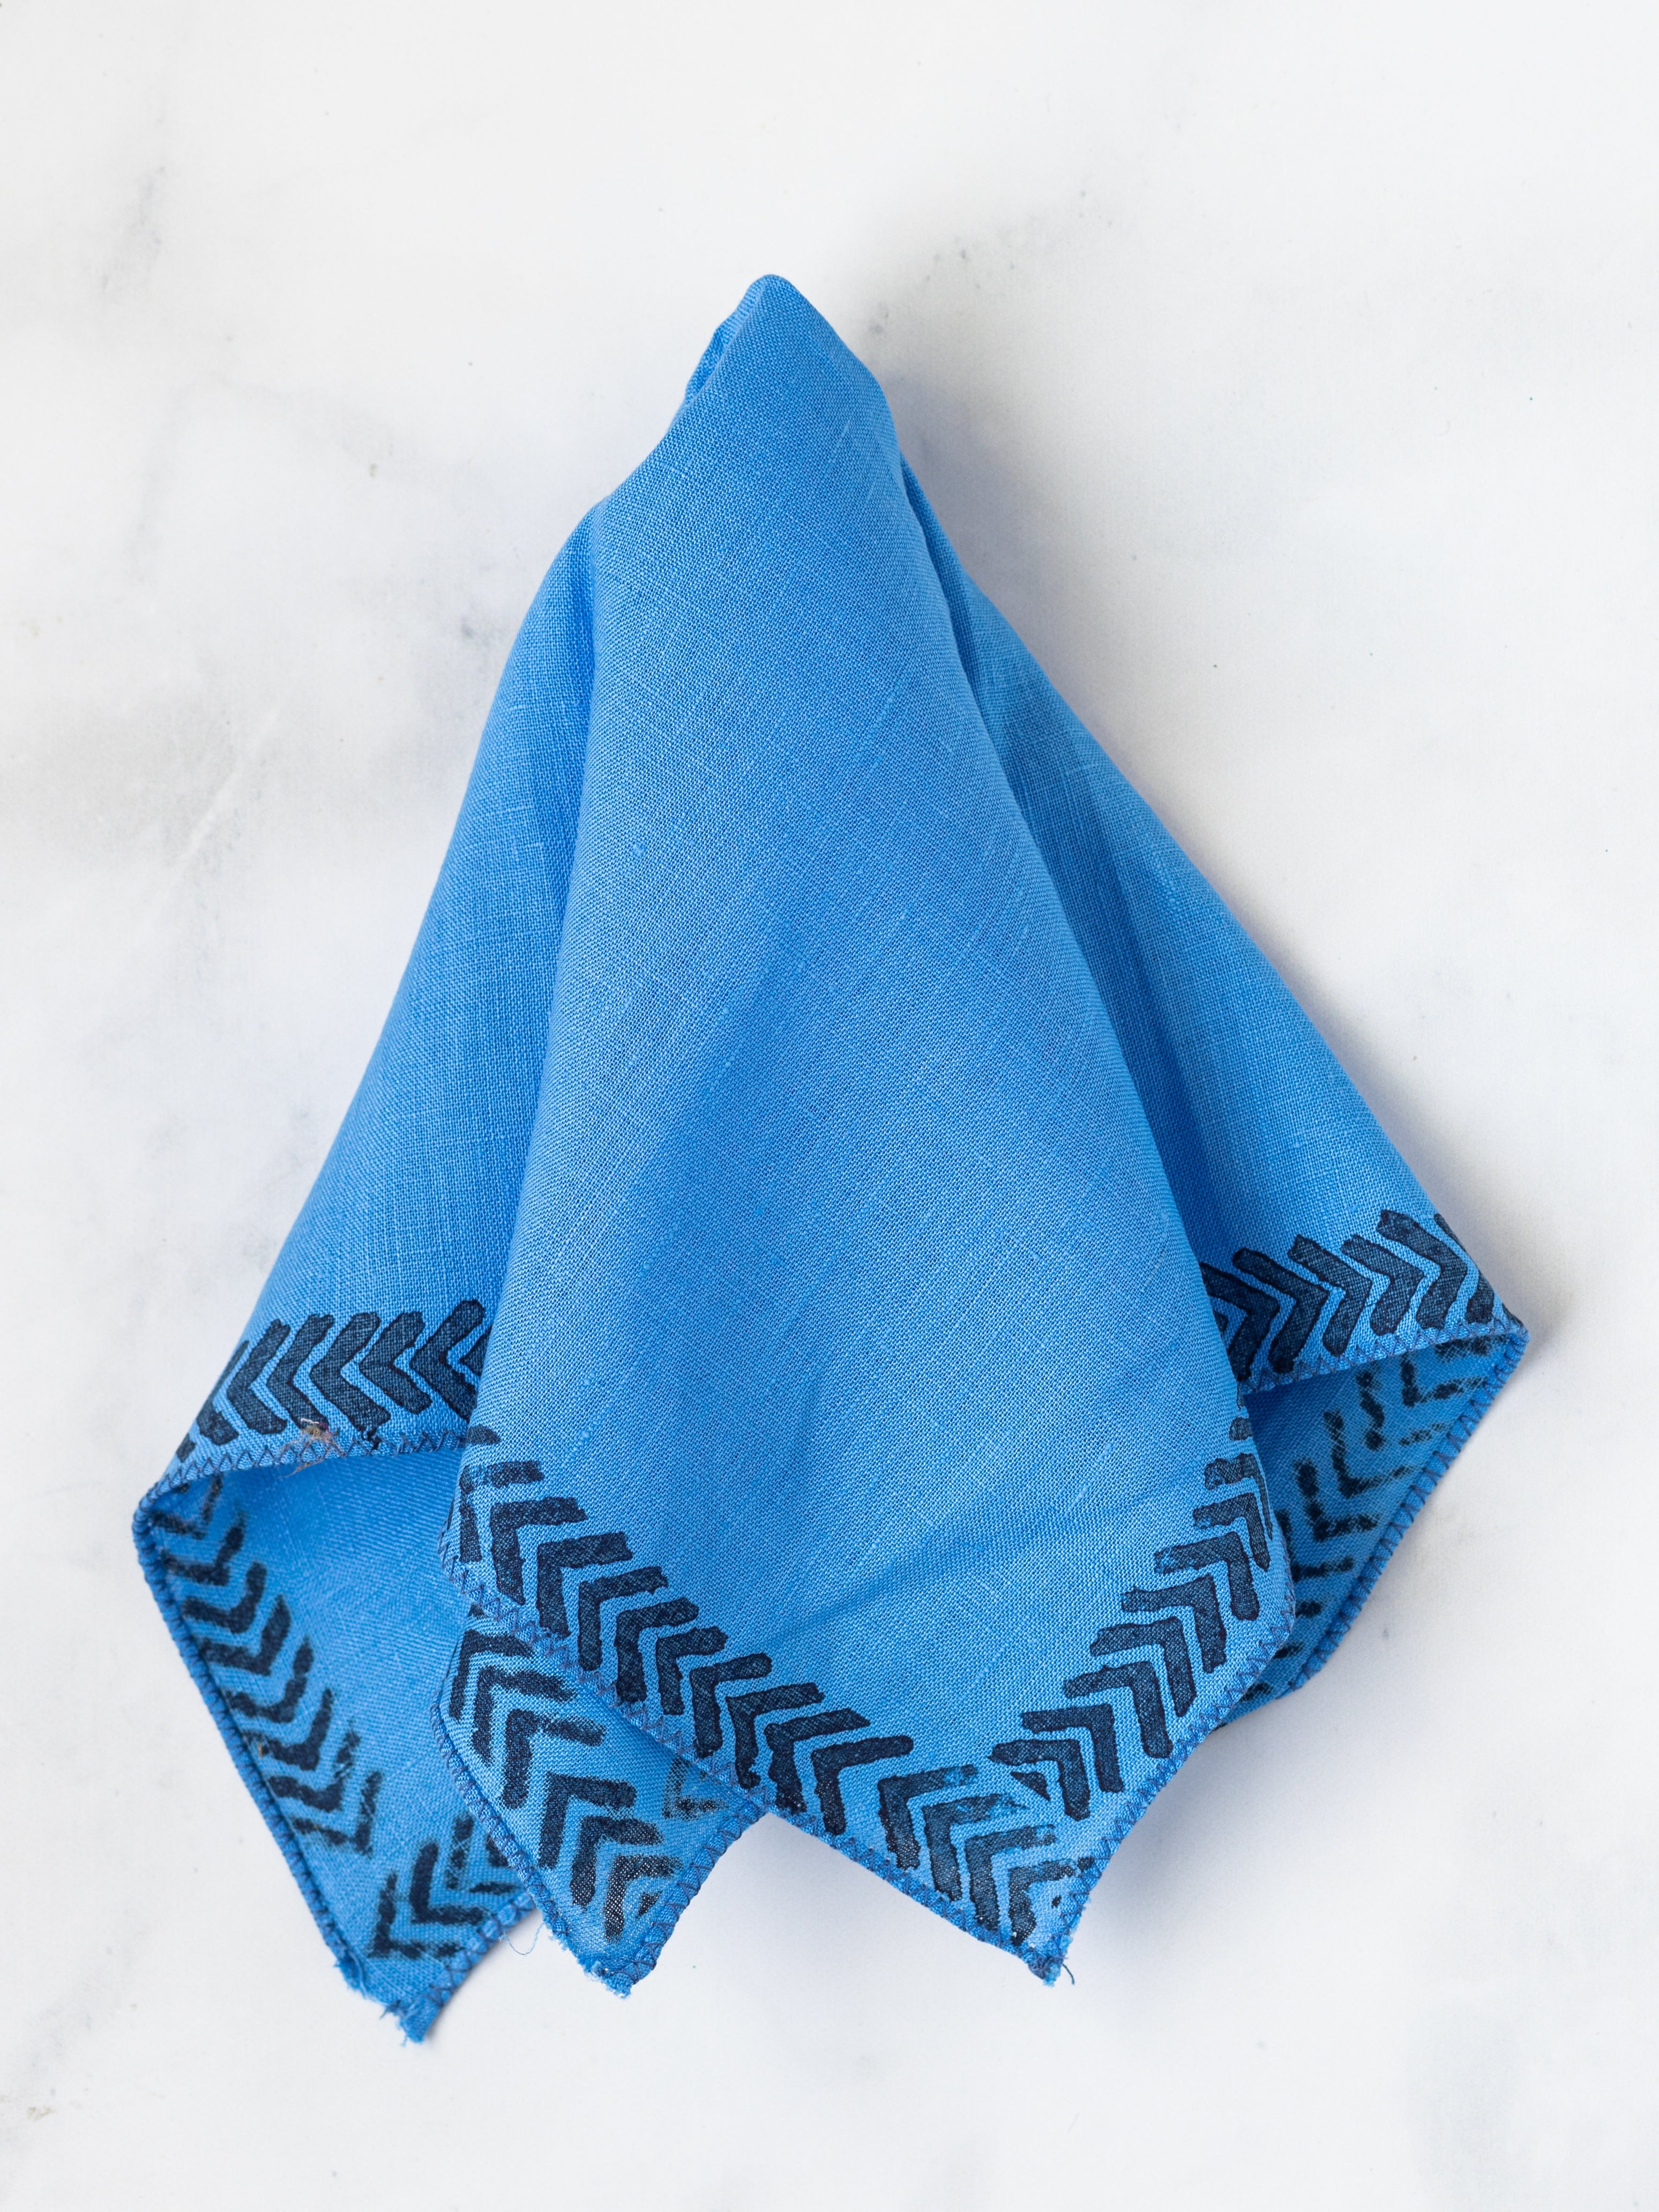 Pocket Square - Blue Linen with Arrows, Navy by Mended